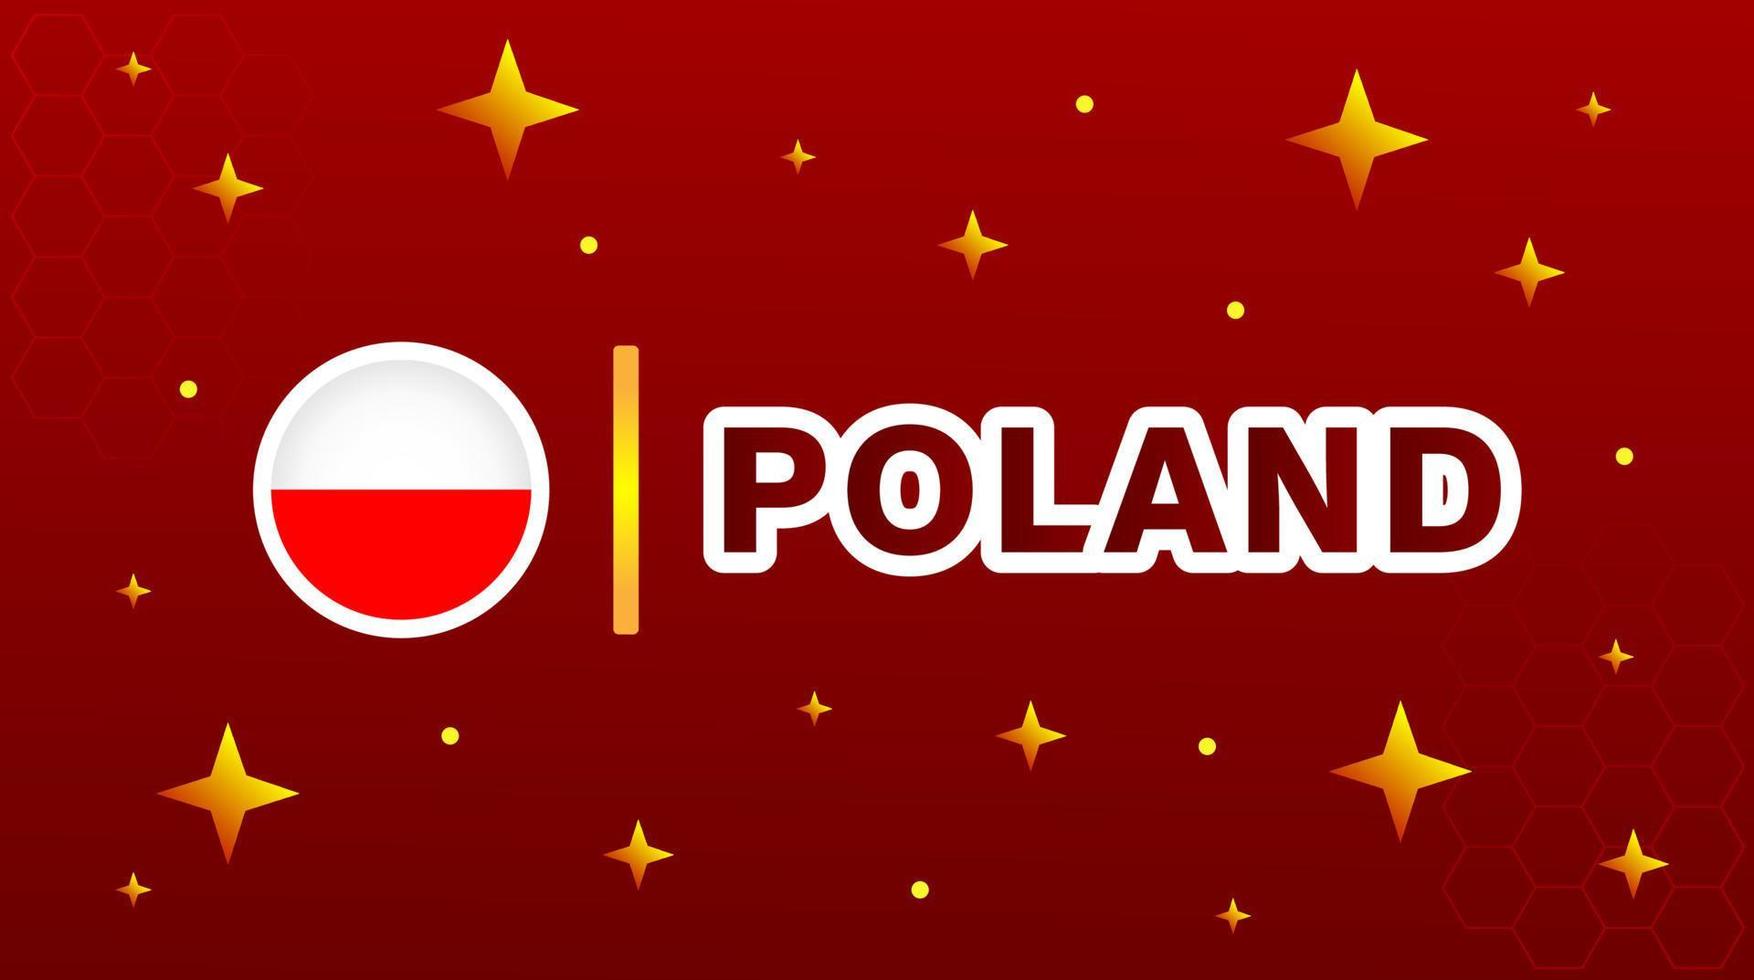 Poland flag with stars on red maroon background. vector